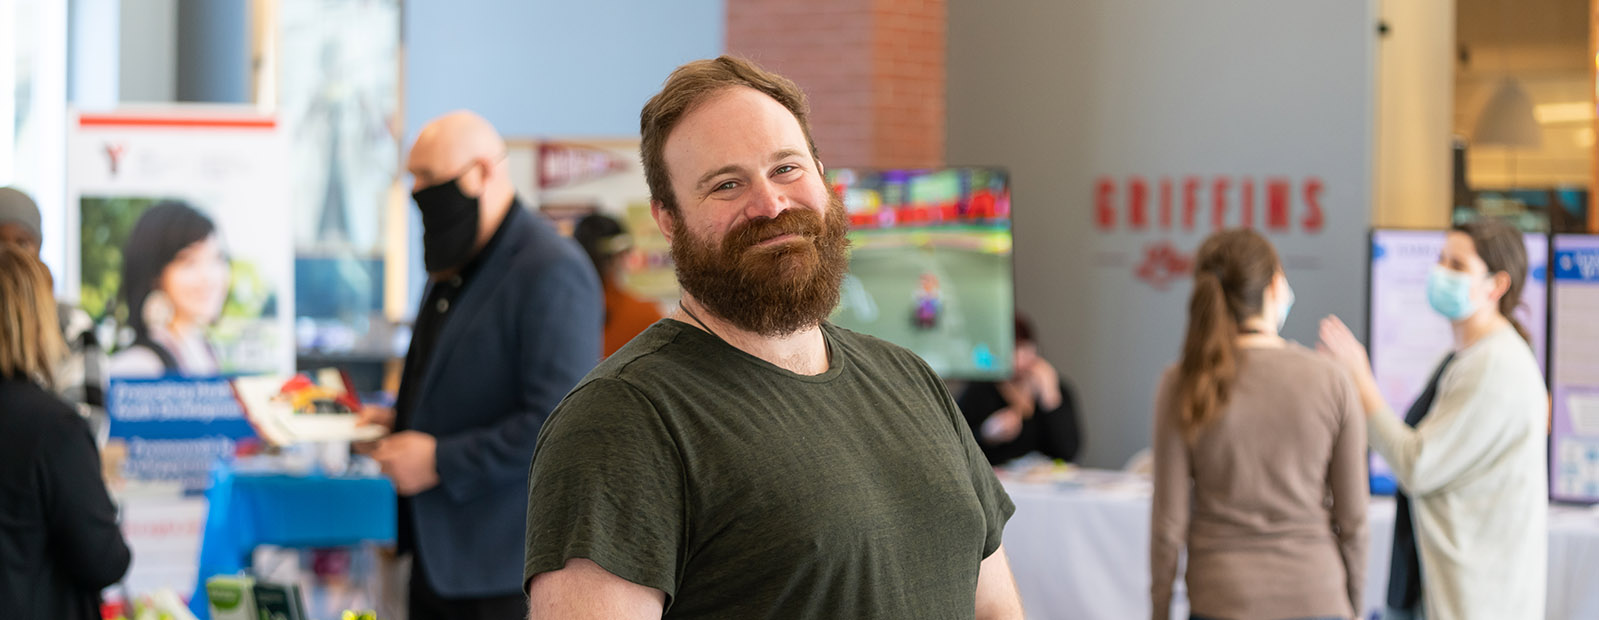 Connor Leflar at MacEwan's Harm Reduction Resource Fair in early April